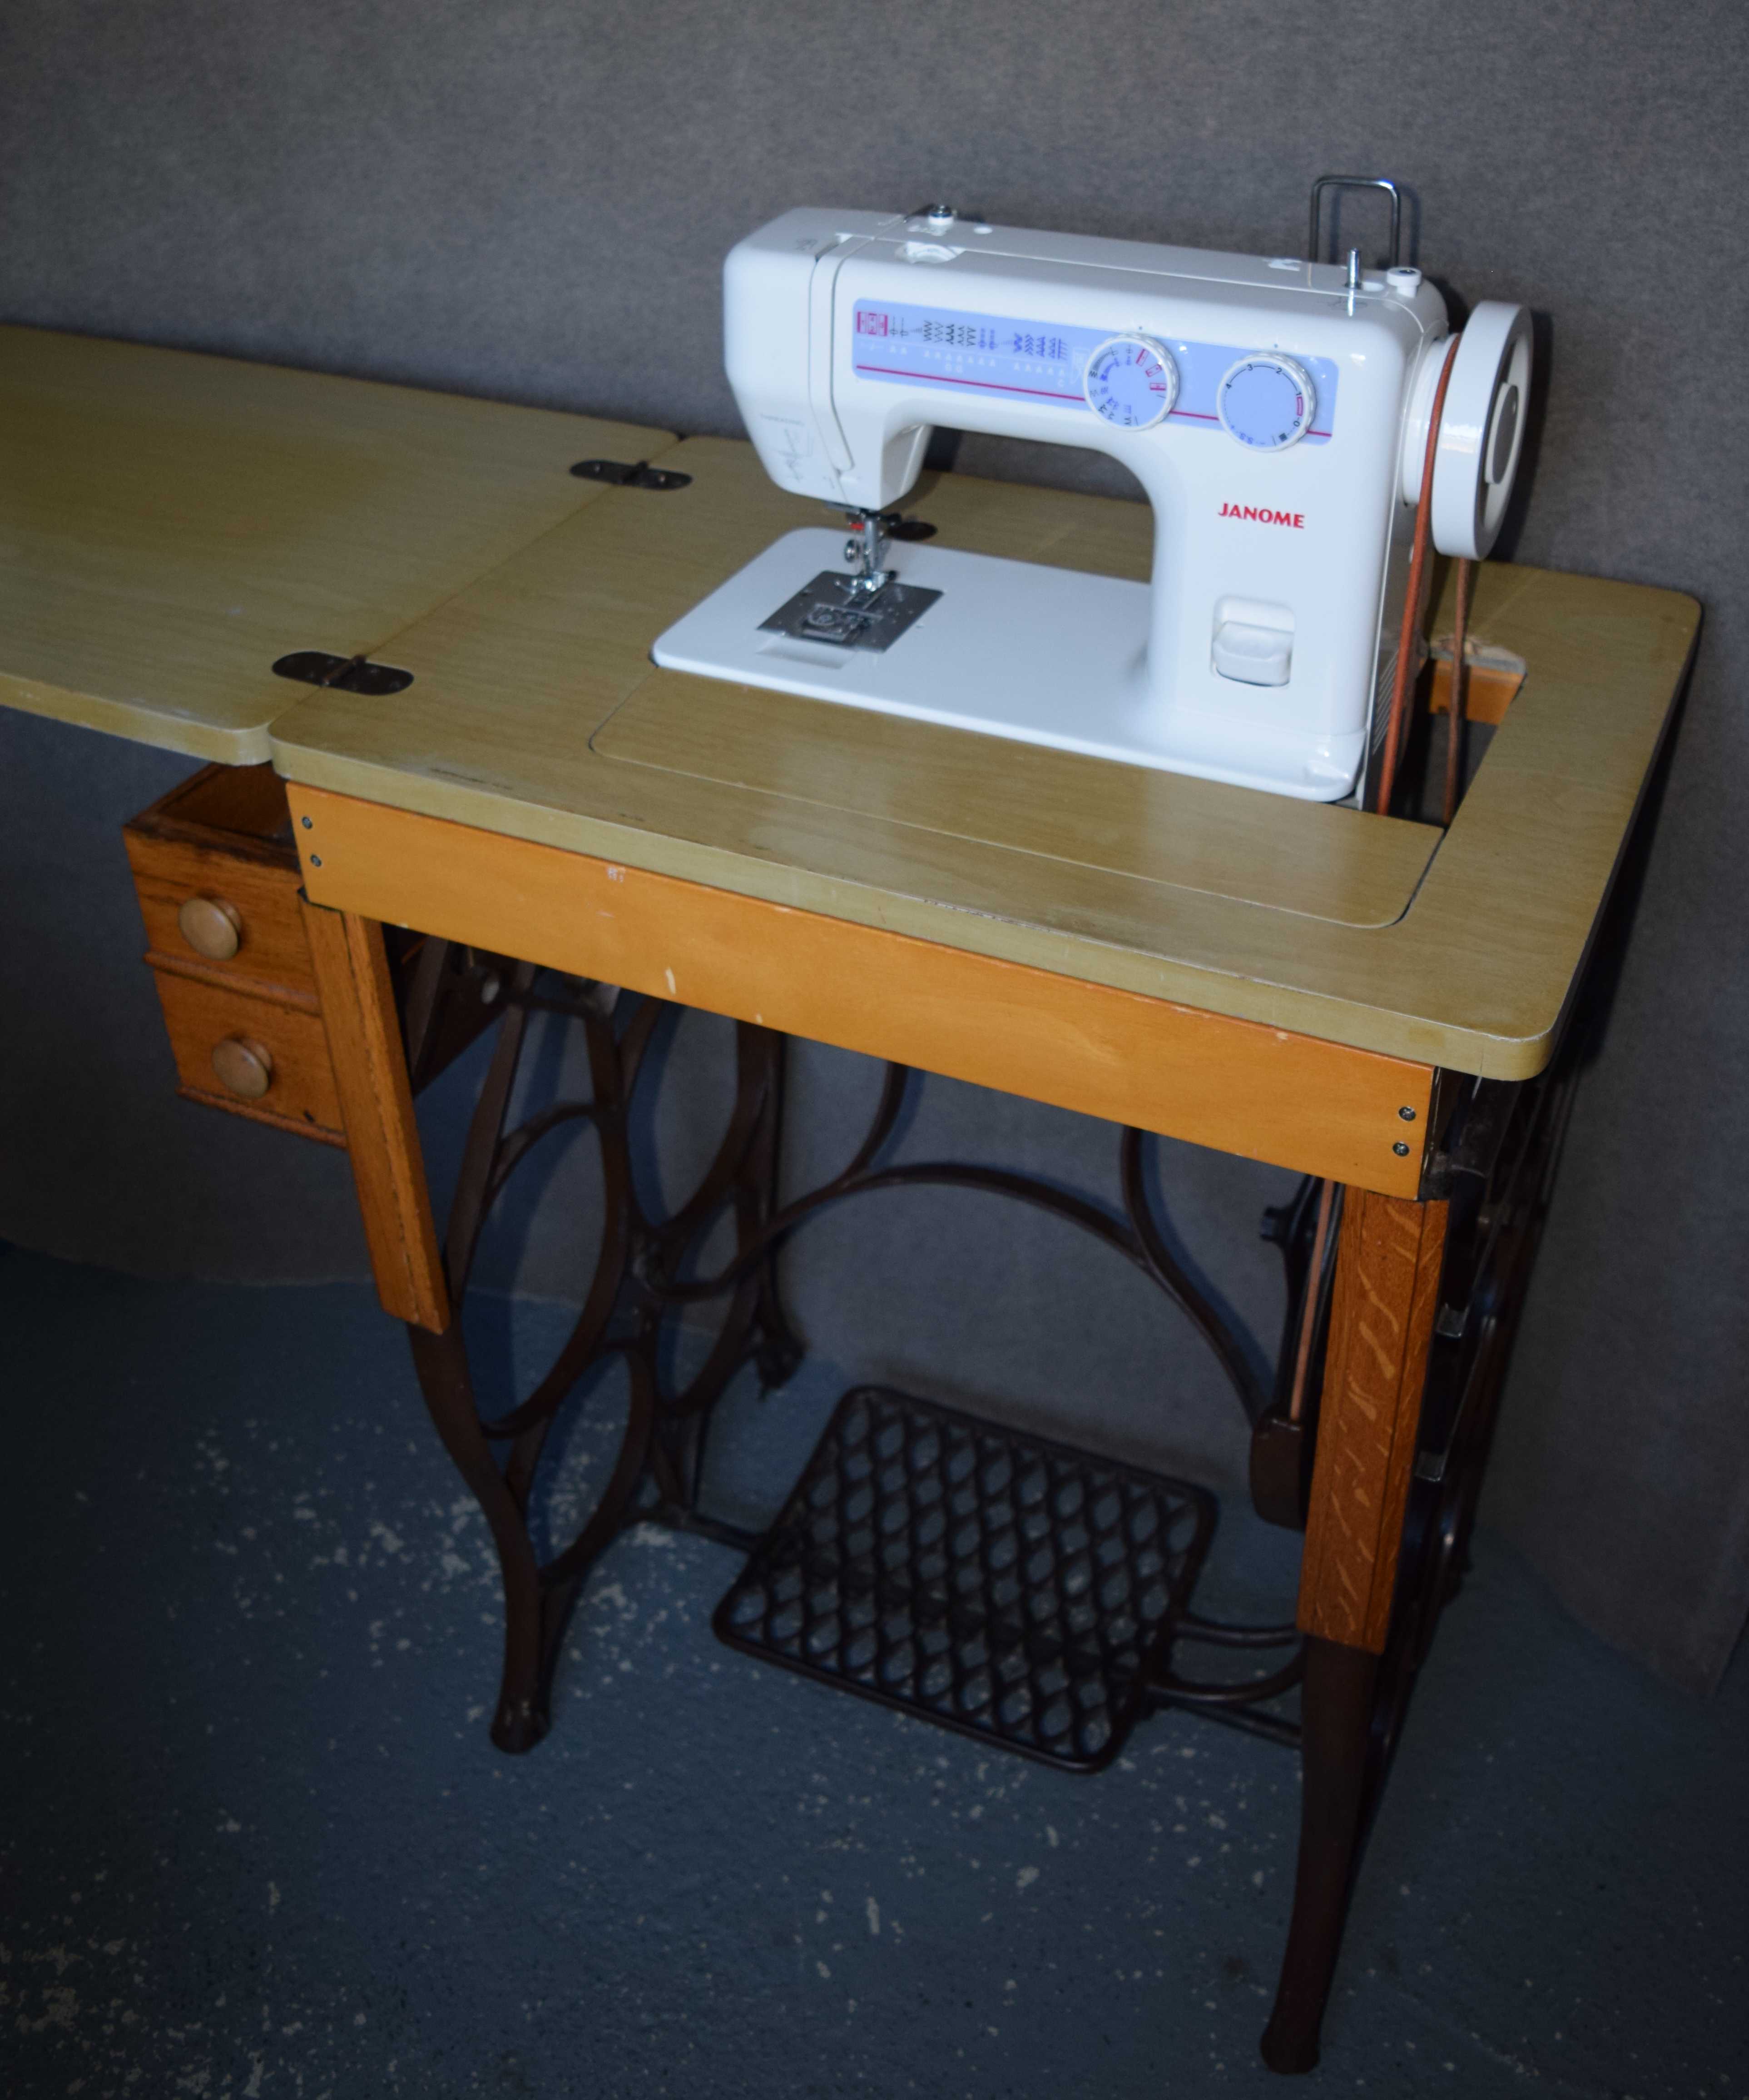 Review: Janome 712T Treadle Sewing Machine